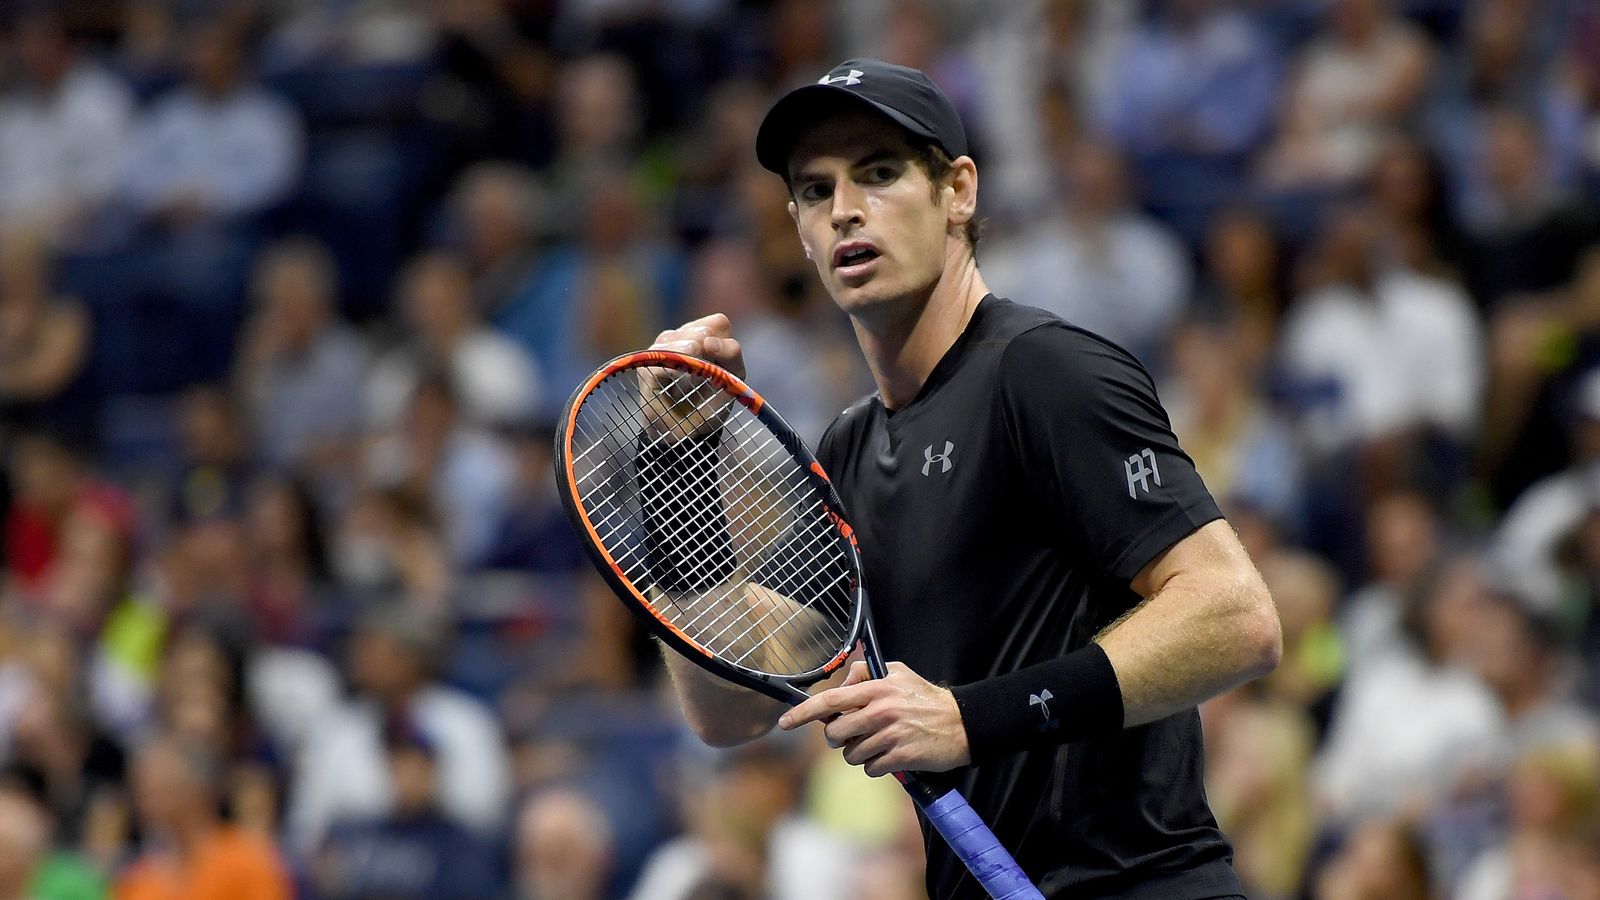 Andy Murray records his fastest serve in US Open win over Grigor